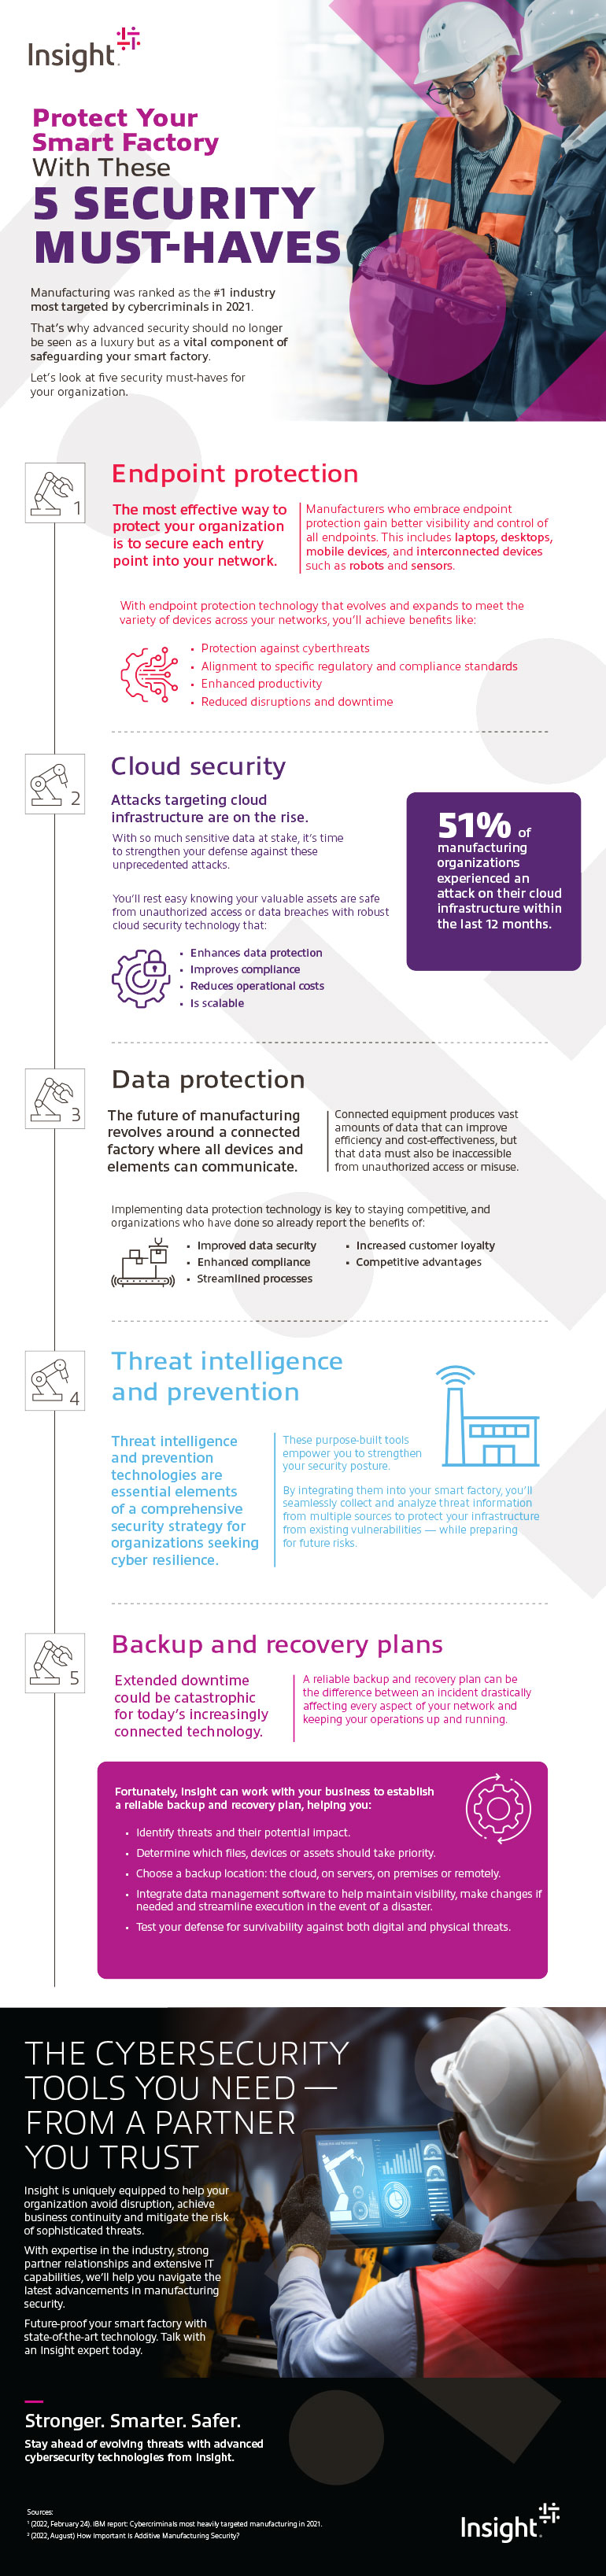 Protect Your Smart Factory With These 5 Security Must-Haves infographic as transcribed below